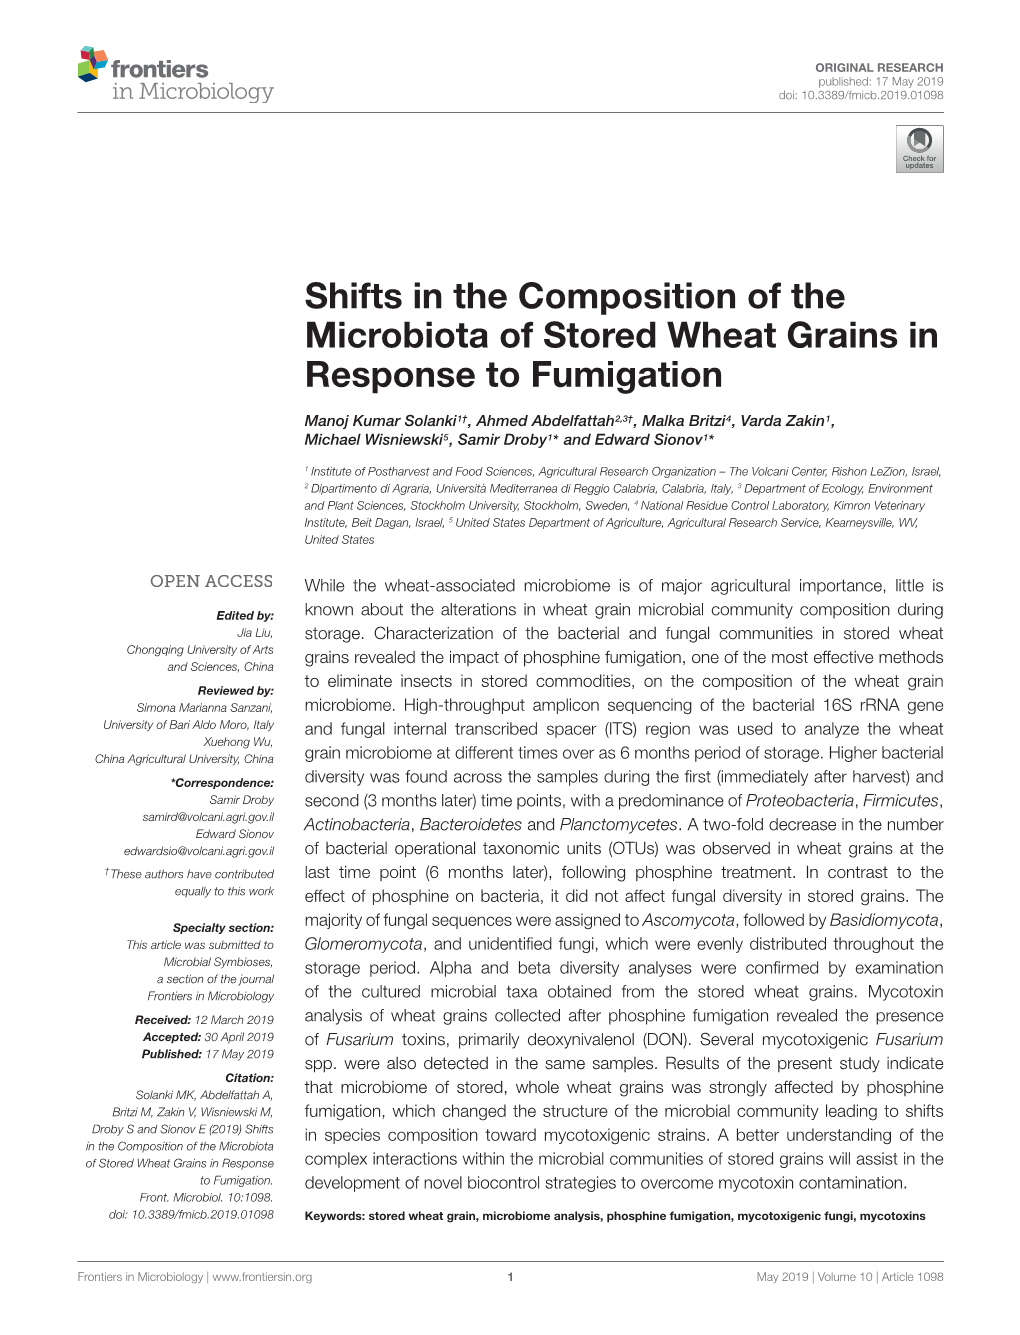 Shifts in the Composition of the Microbiota of Stored Wheat Grains in Response to Fumigation